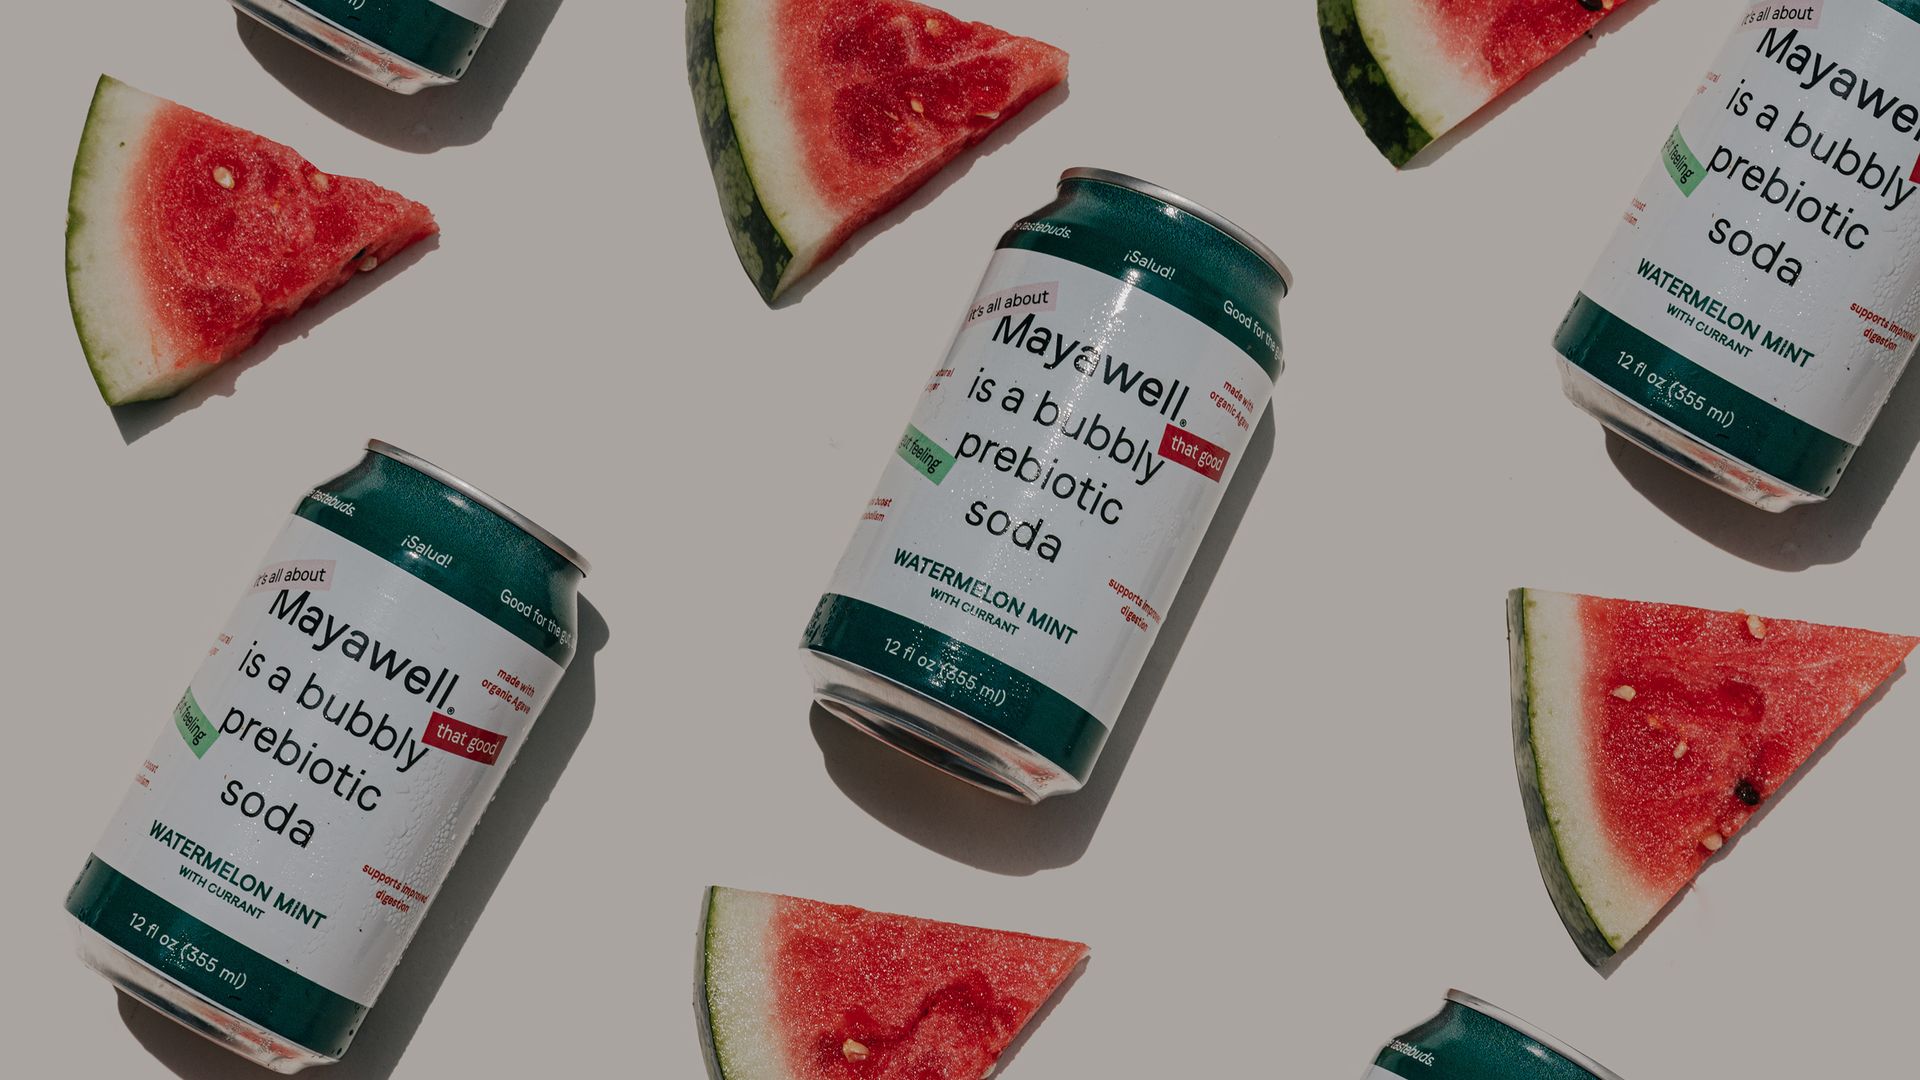 Sliced watermelon interspersed with white and green aluminums cans containing a prebiotic carbonated beverage from Mayawell.